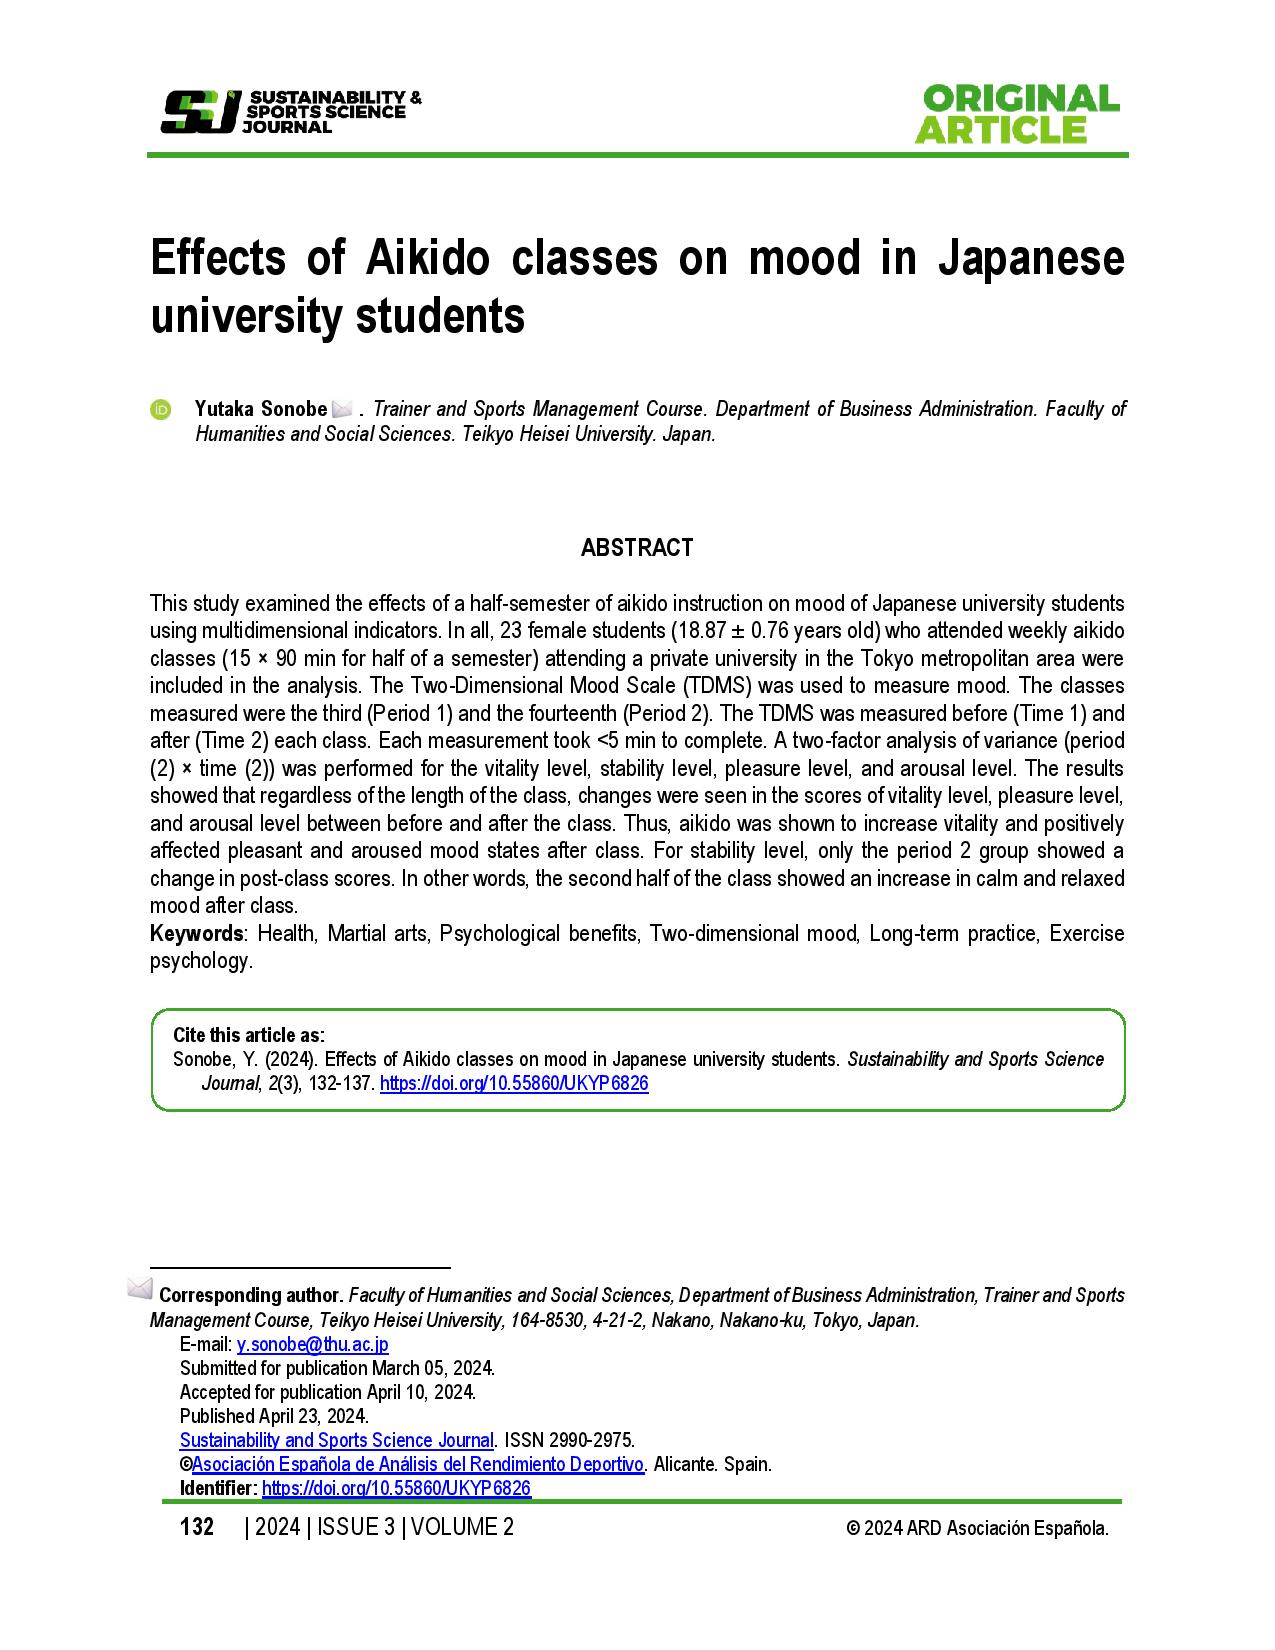 Effects of Aikido classes on mood in Japanese university students